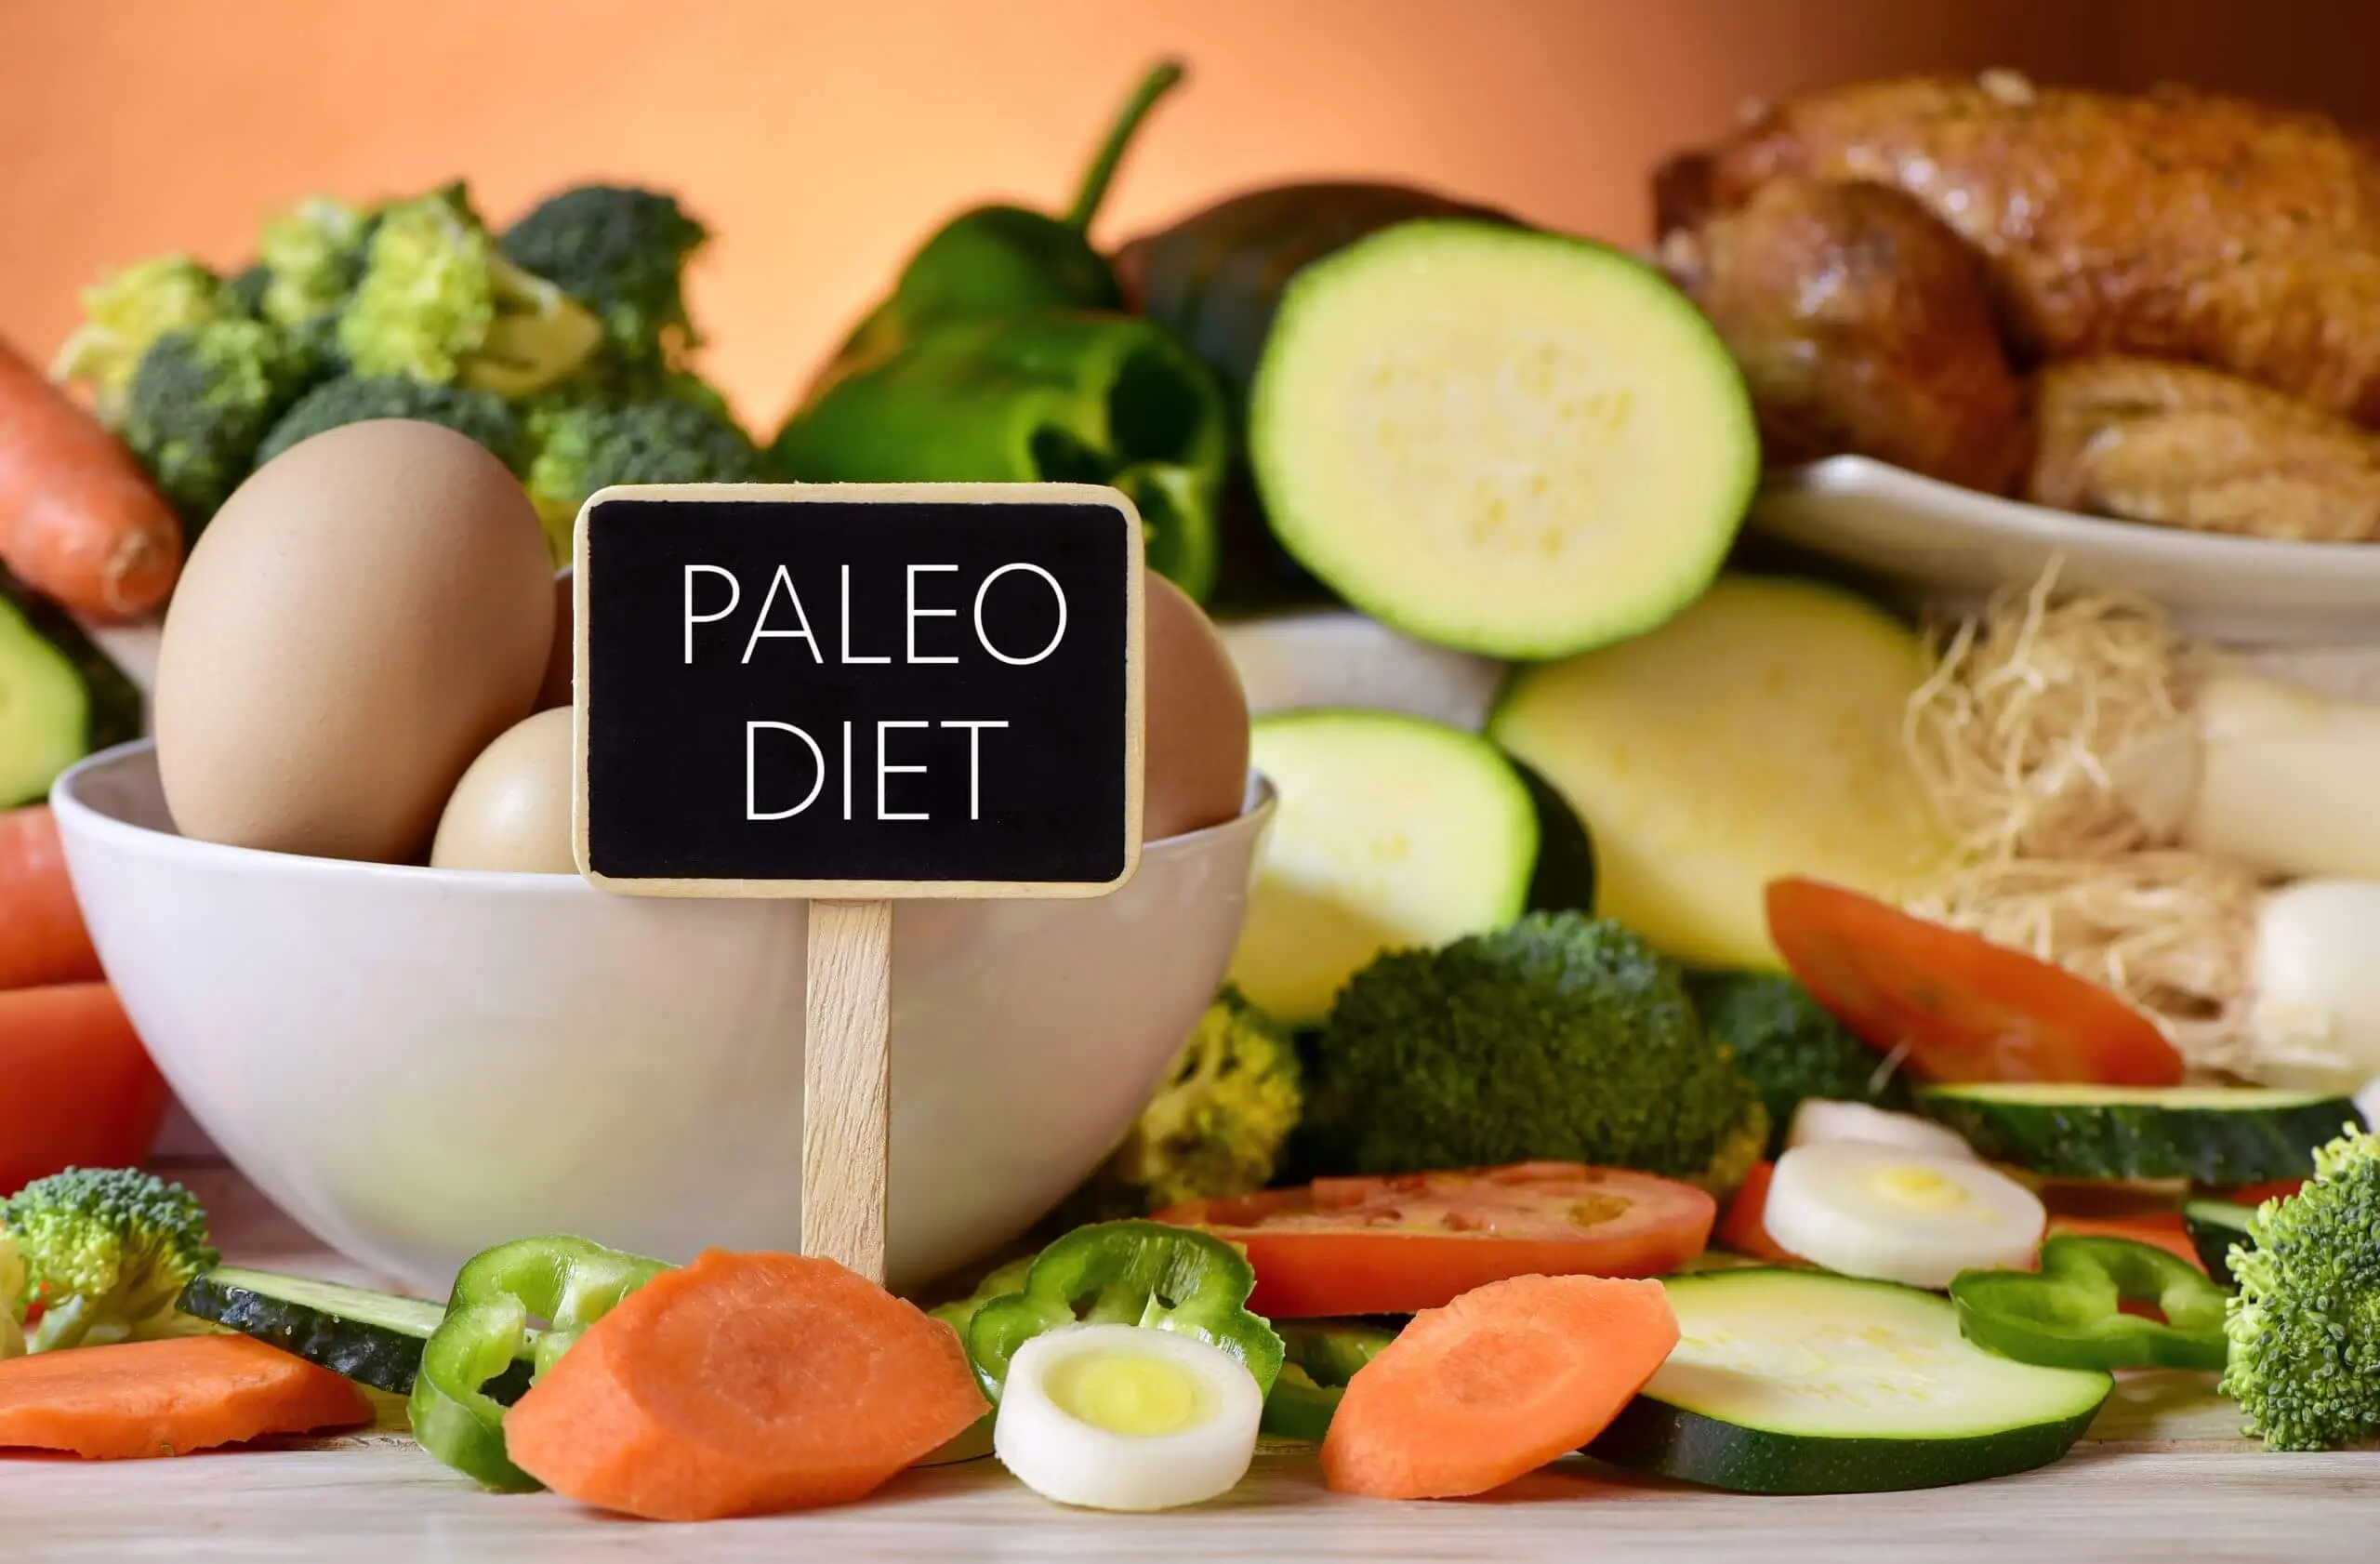 Paleo diet sign on a table full of various raw vegetables, a bowl of chicken eggs and chicken